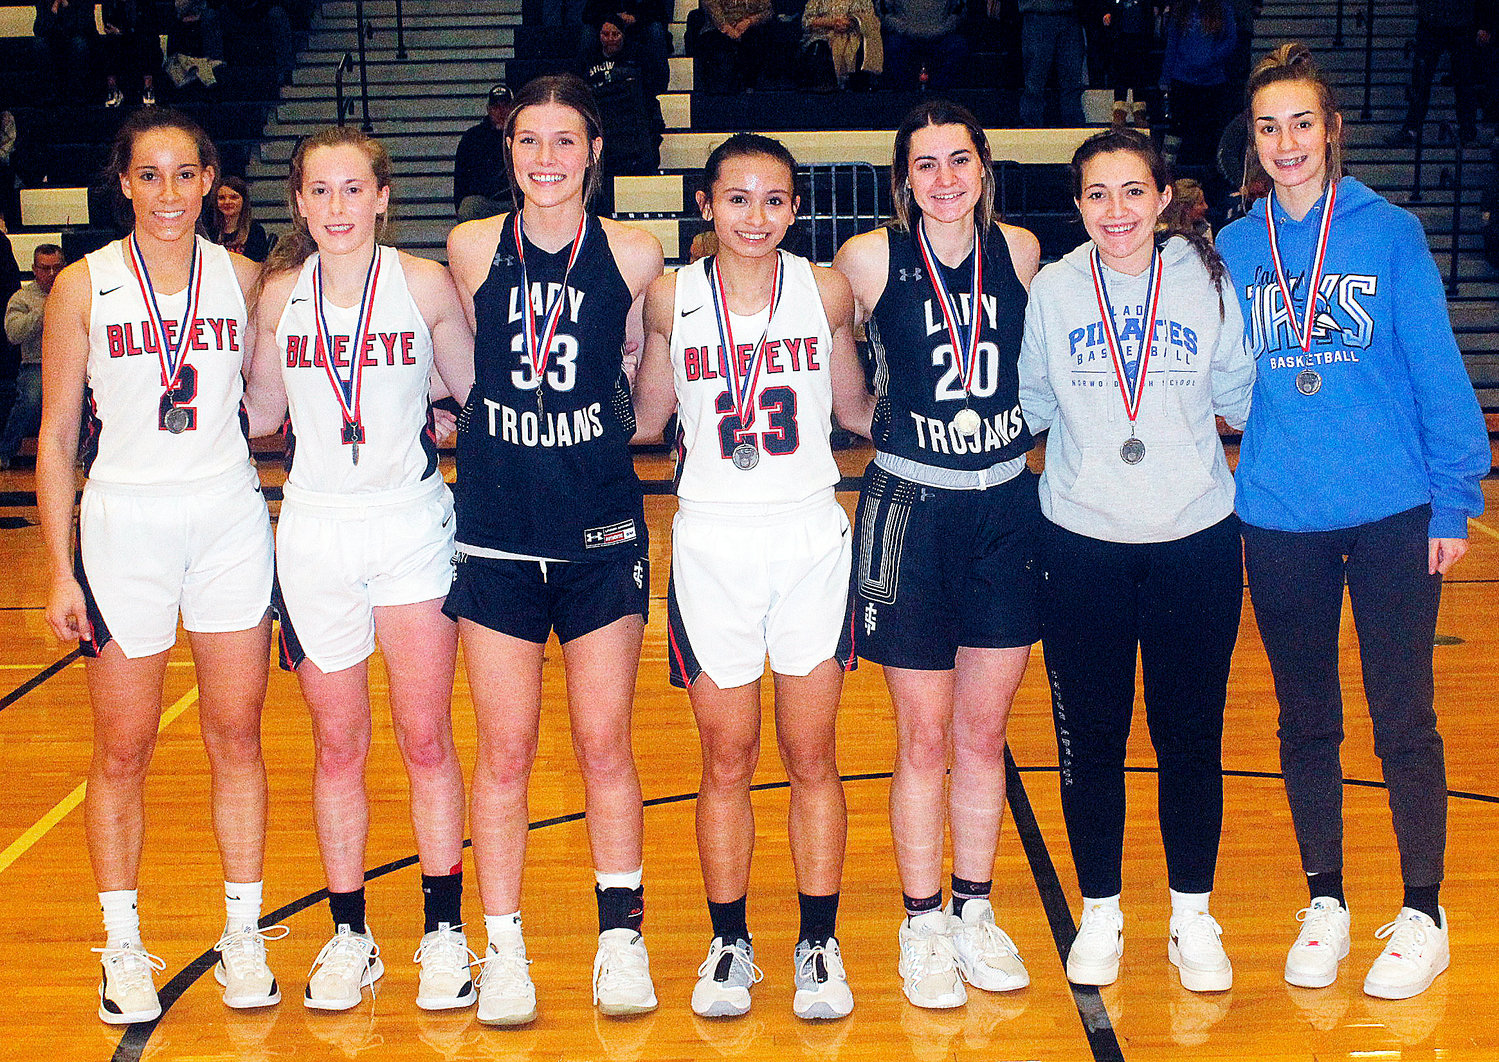 THE SPARTA TOURNAMENT ALL-TOURNAMENT TEAM includes (l-r) Blue Eye’s Riley Arnold and Avery Arnold, Sparta’s Megan Brown, Blue Eye’s Kyla Warren, Sparta’s Shelby McMurry, Norwood’s Norwood’s Cassie Chadwell and Greenwood’s Hannah Gibbons.